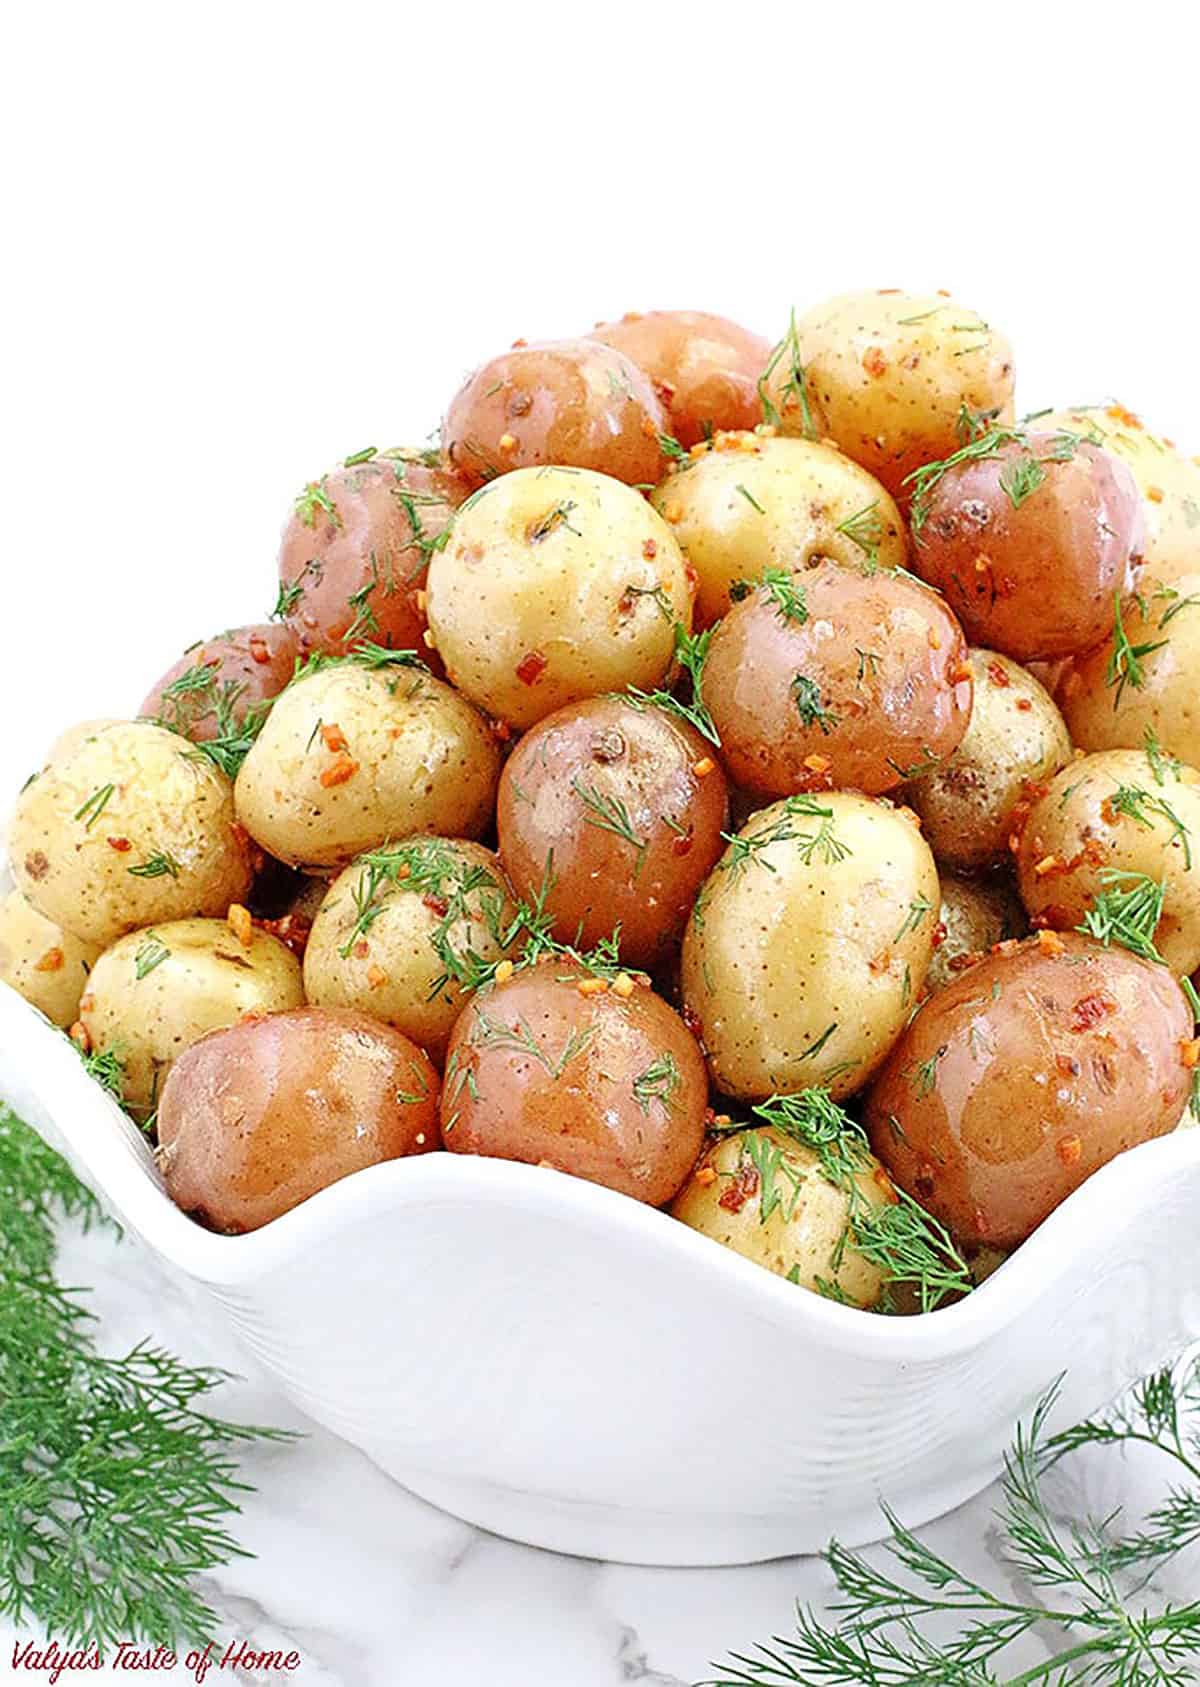 This recipe takes only 30 minutes to make for the most delicious oven-roasted potatoes that are crispy on the outside, and buttery soft on the inside.